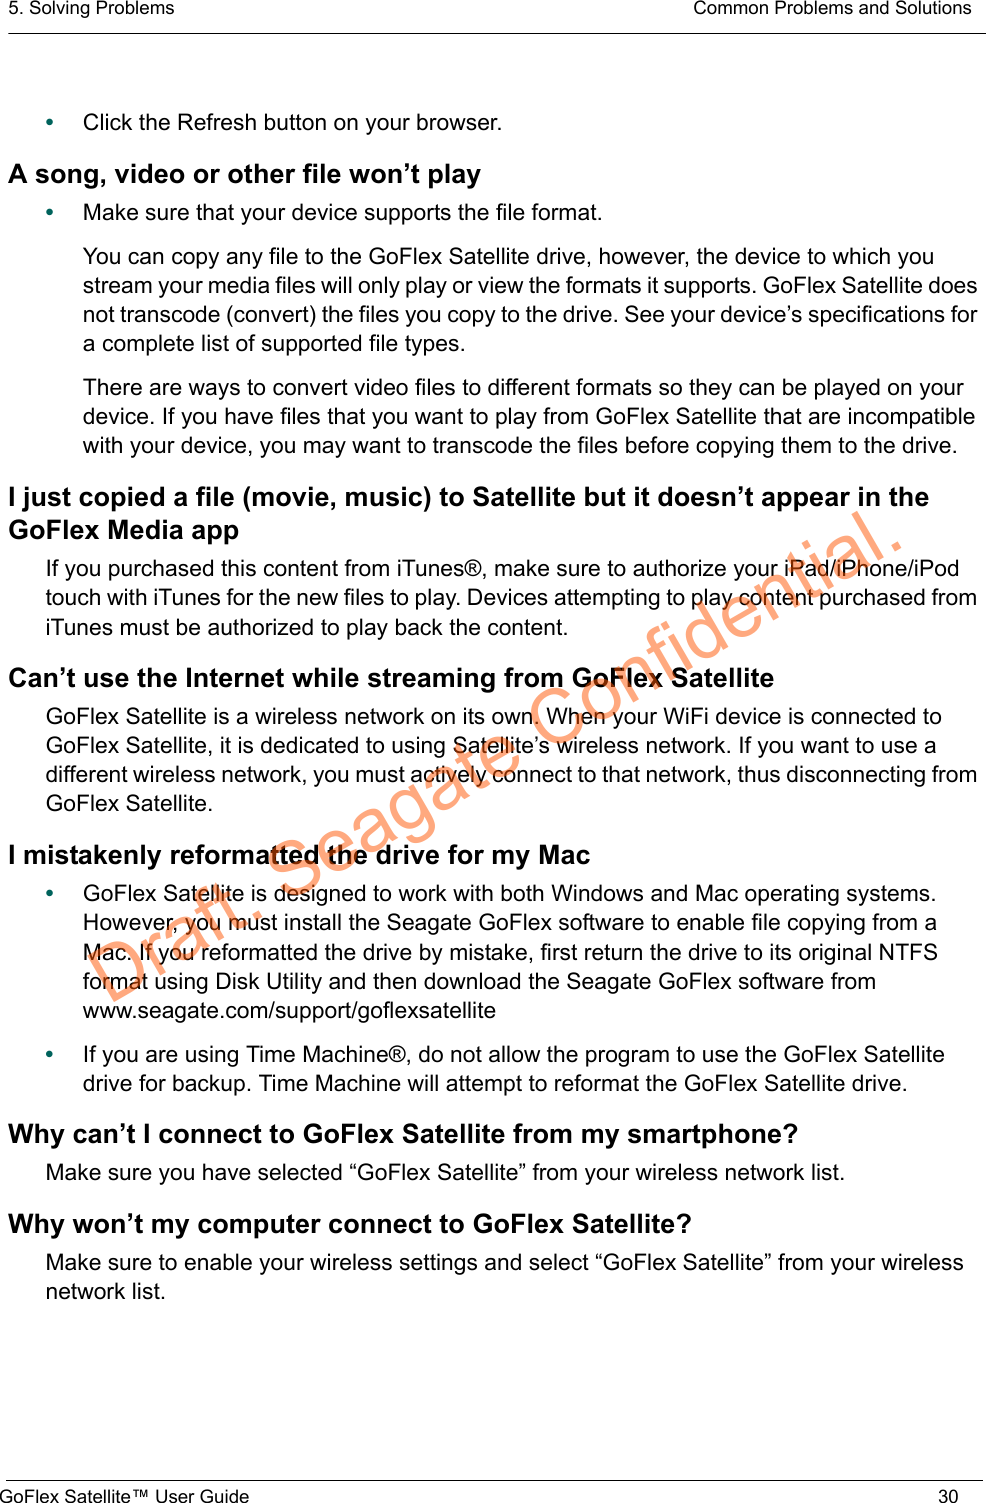 5. Solving Problems  Common Problems and SolutionsGoFlex Satellite™ User Guide 30•Click the Refresh button on your browser.A song, video or other file won’t play•Make sure that your device supports the file format.You can copy any file to the GoFlex Satellite drive, however, the device to which you stream your media files will only play or view the formats it supports. GoFlex Satellite does not transcode (convert) the files you copy to the drive. See your device’s specifications for a complete list of supported file types.There are ways to convert video files to different formats so they can be played on your device. If you have files that you want to play from GoFlex Satellite that are incompatible with your device, you may want to transcode the files before copying them to the drive.I just copied a file (movie, music) to Satellite but it doesn’t appear in the GoFlex Media appIf you purchased this content from iTunes®, make sure to authorize your iPad/iPhone/iPod touch with iTunes for the new files to play. Devices attempting to play content purchased from iTunes must be authorized to play back the content.Can’t use the Internet while streaming from GoFlex SatelliteGoFlex Satellite is a wireless network on its own. When your WiFi device is connected to GoFlex Satellite, it is dedicated to using Satellite’s wireless network. If you want to use a different wireless network, you must actively connect to that network, thus disconnecting from GoFlex Satellite.I mistakenly reformatted the drive for my Mac•GoFlex Satellite is designed to work with both Windows and Mac operating systems. However, you must install the Seagate GoFlex software to enable file copying from a Mac. If you reformatted the drive by mistake, first return the drive to its original NTFS format using Disk Utility and then download the Seagate GoFlex software from www.seagate.com/support/goflexsatellite•If you are using Time Machine®, do not allow the program to use the GoFlex Satellite drive for backup. Time Machine will attempt to reformat the GoFlex Satellite drive.Why can’t I connect to GoFlex Satellite from my smartphone?Make sure you have selected “GoFlex Satellite” from your wireless network list.Why won’t my computer connect to GoFlex Satellite?Make sure to enable your wireless settings and select “GoFlex Satellite” from your wireless network list.Draft. Seagate Confidential.